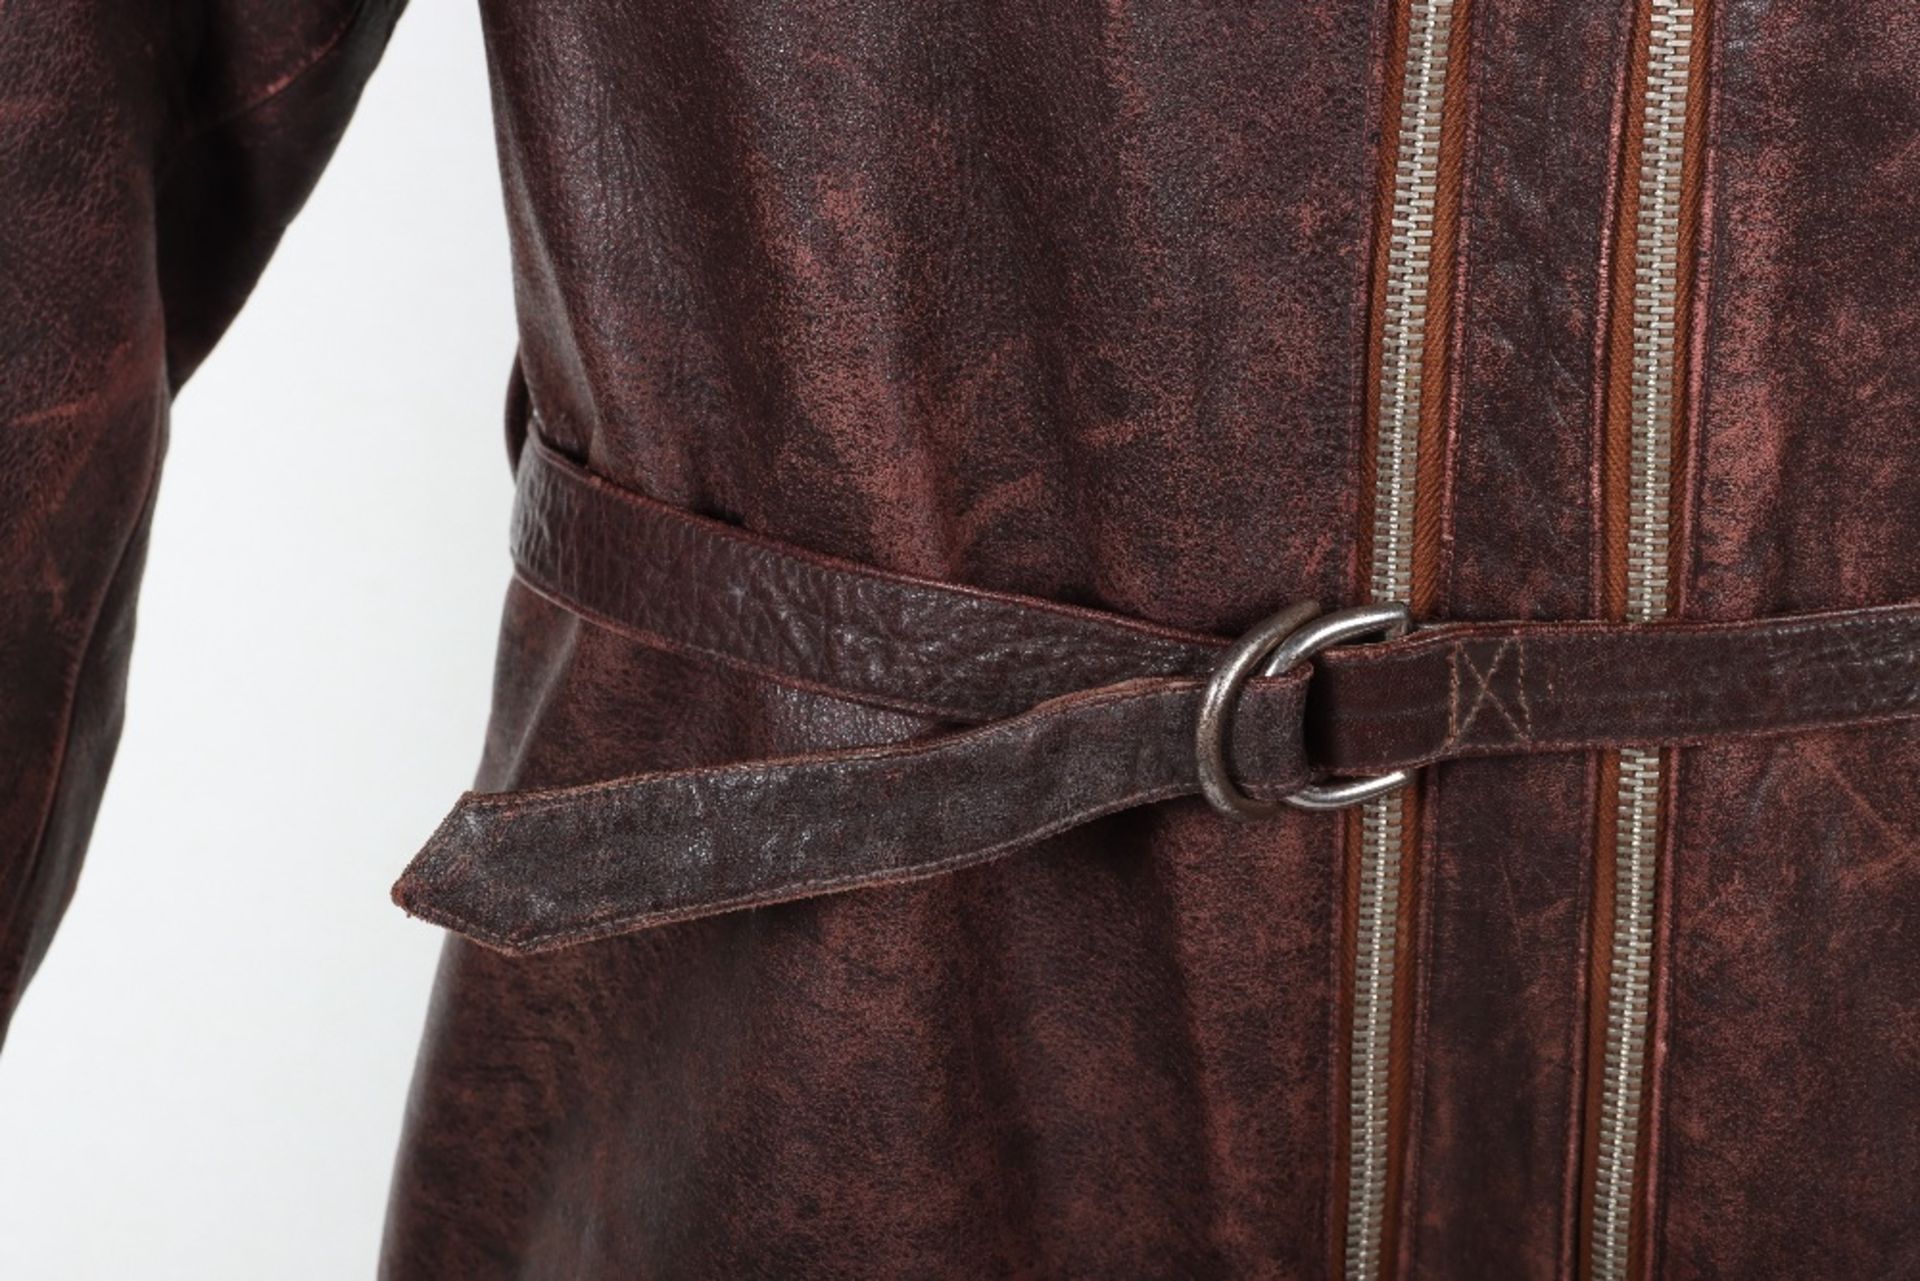 One Piece Leather Flight Suit - Image 4 of 8